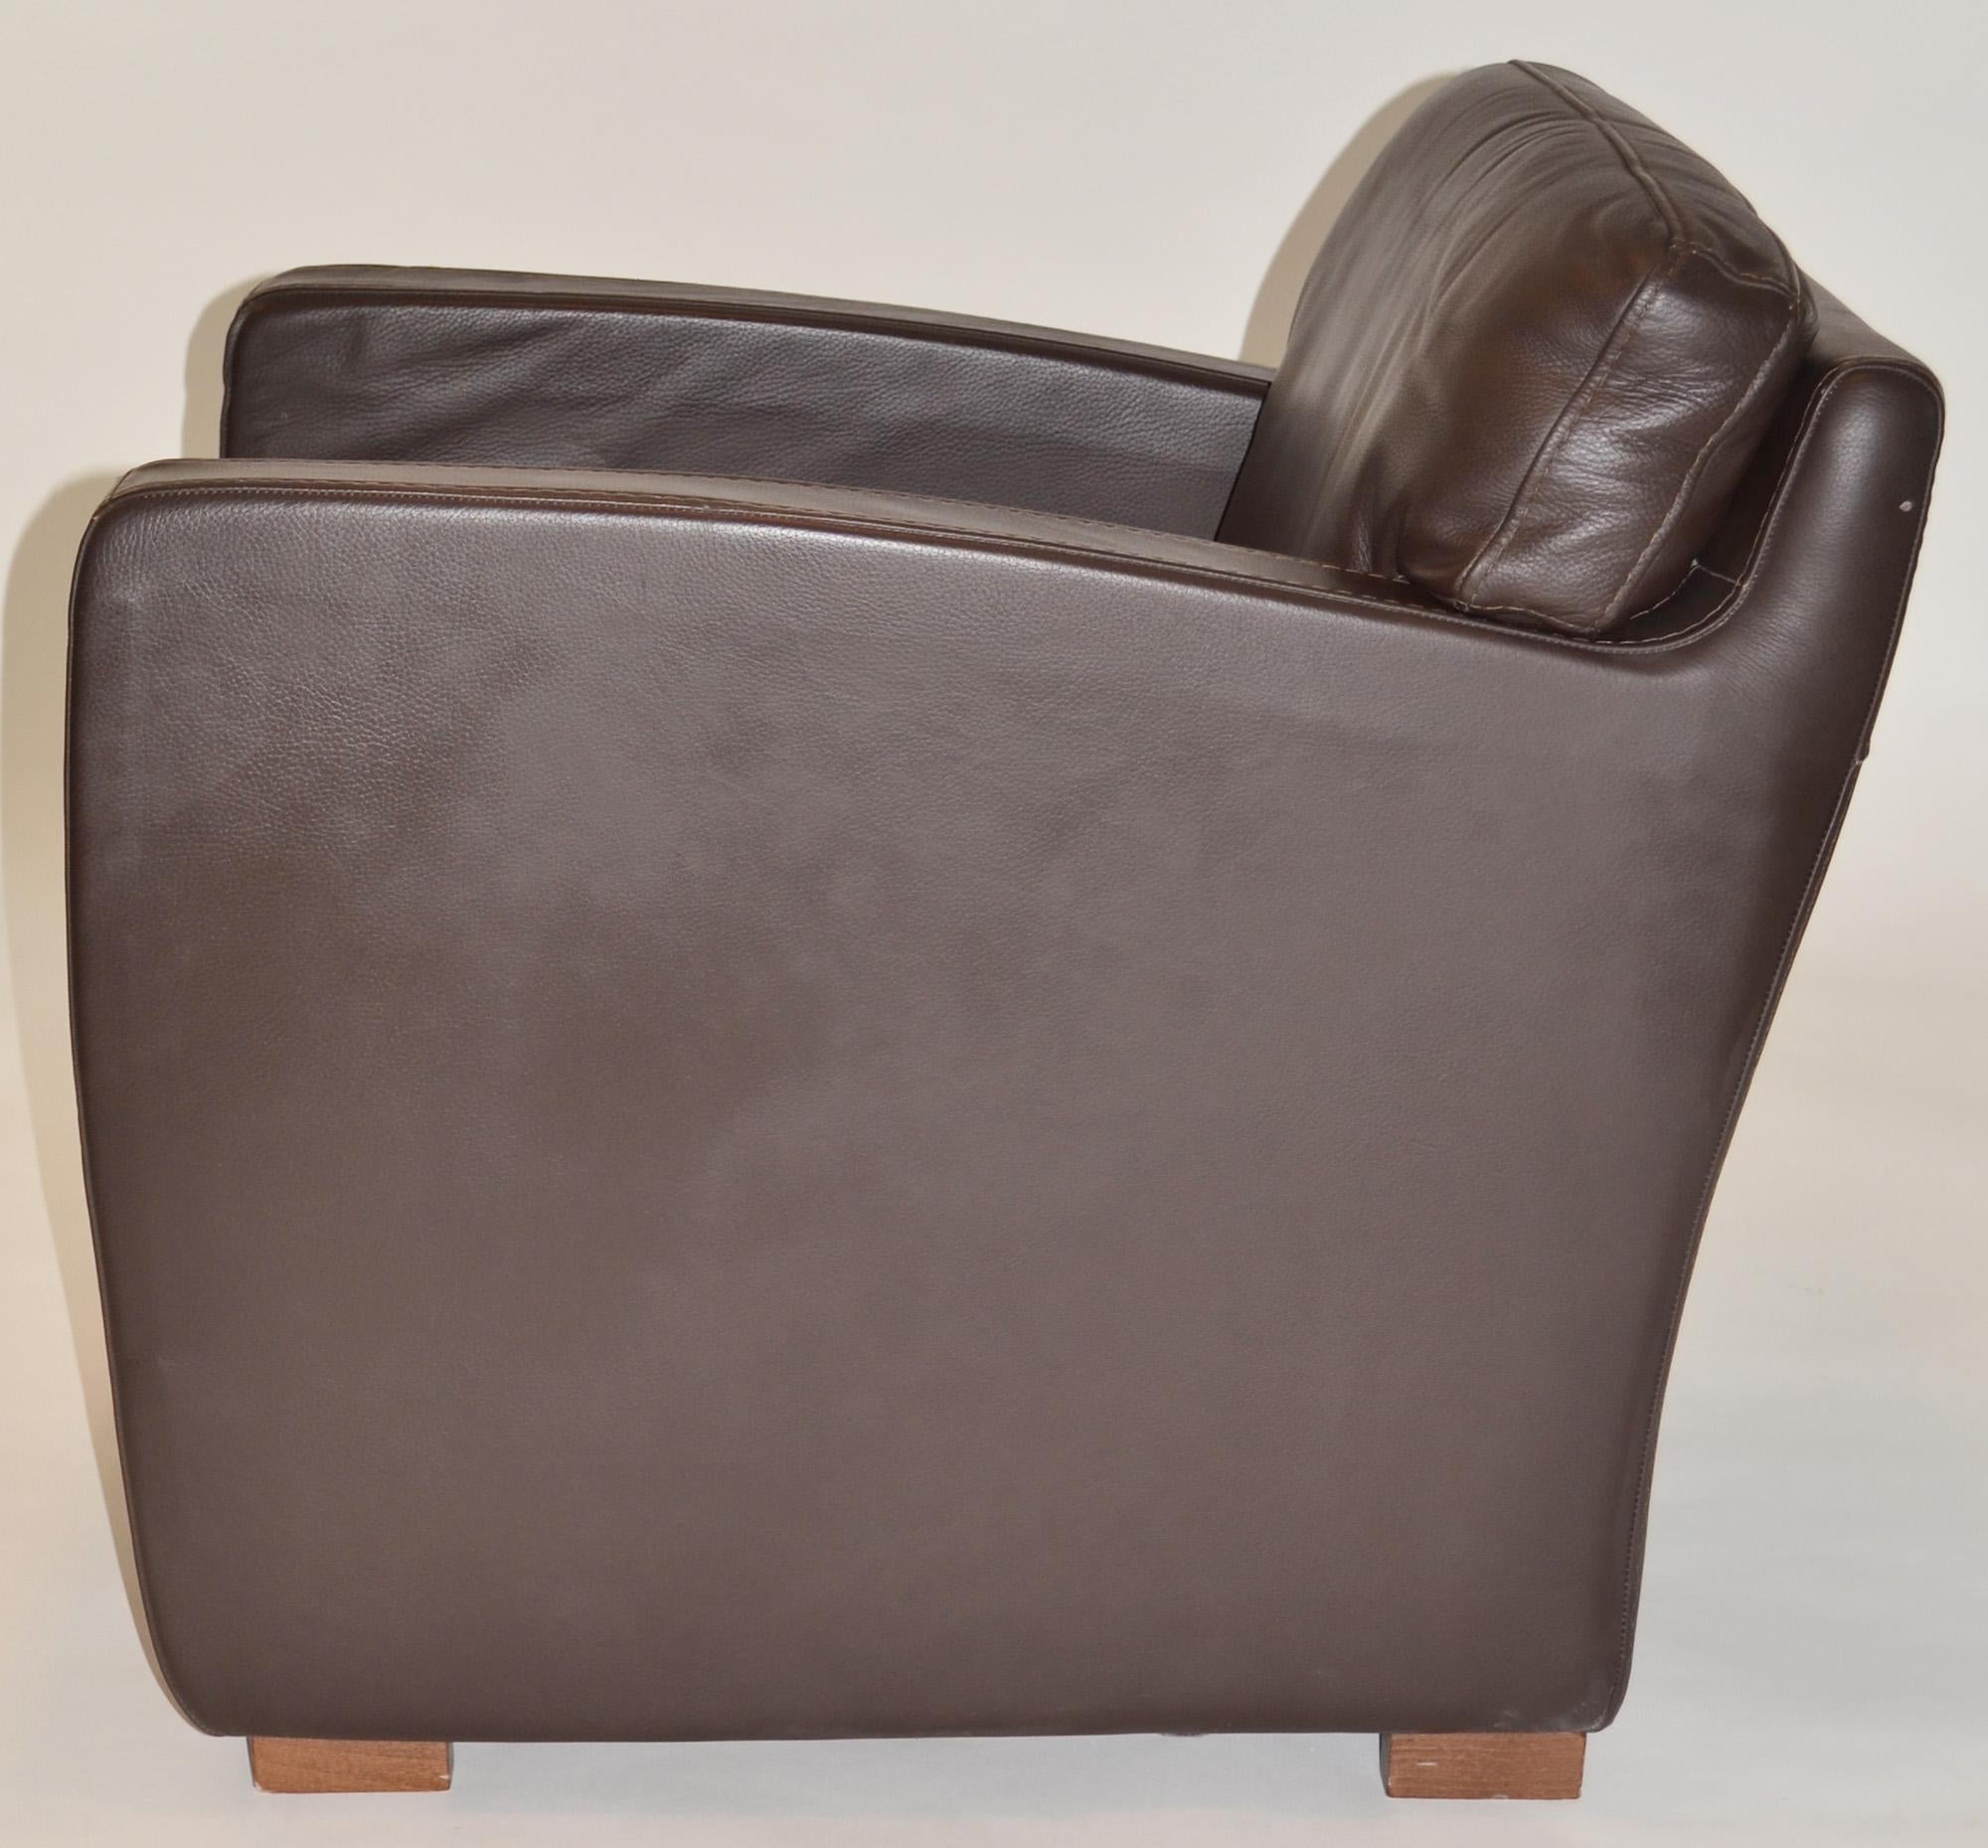 20th Century Pair of Leather Arm or Club Chairs by Roche Bobois